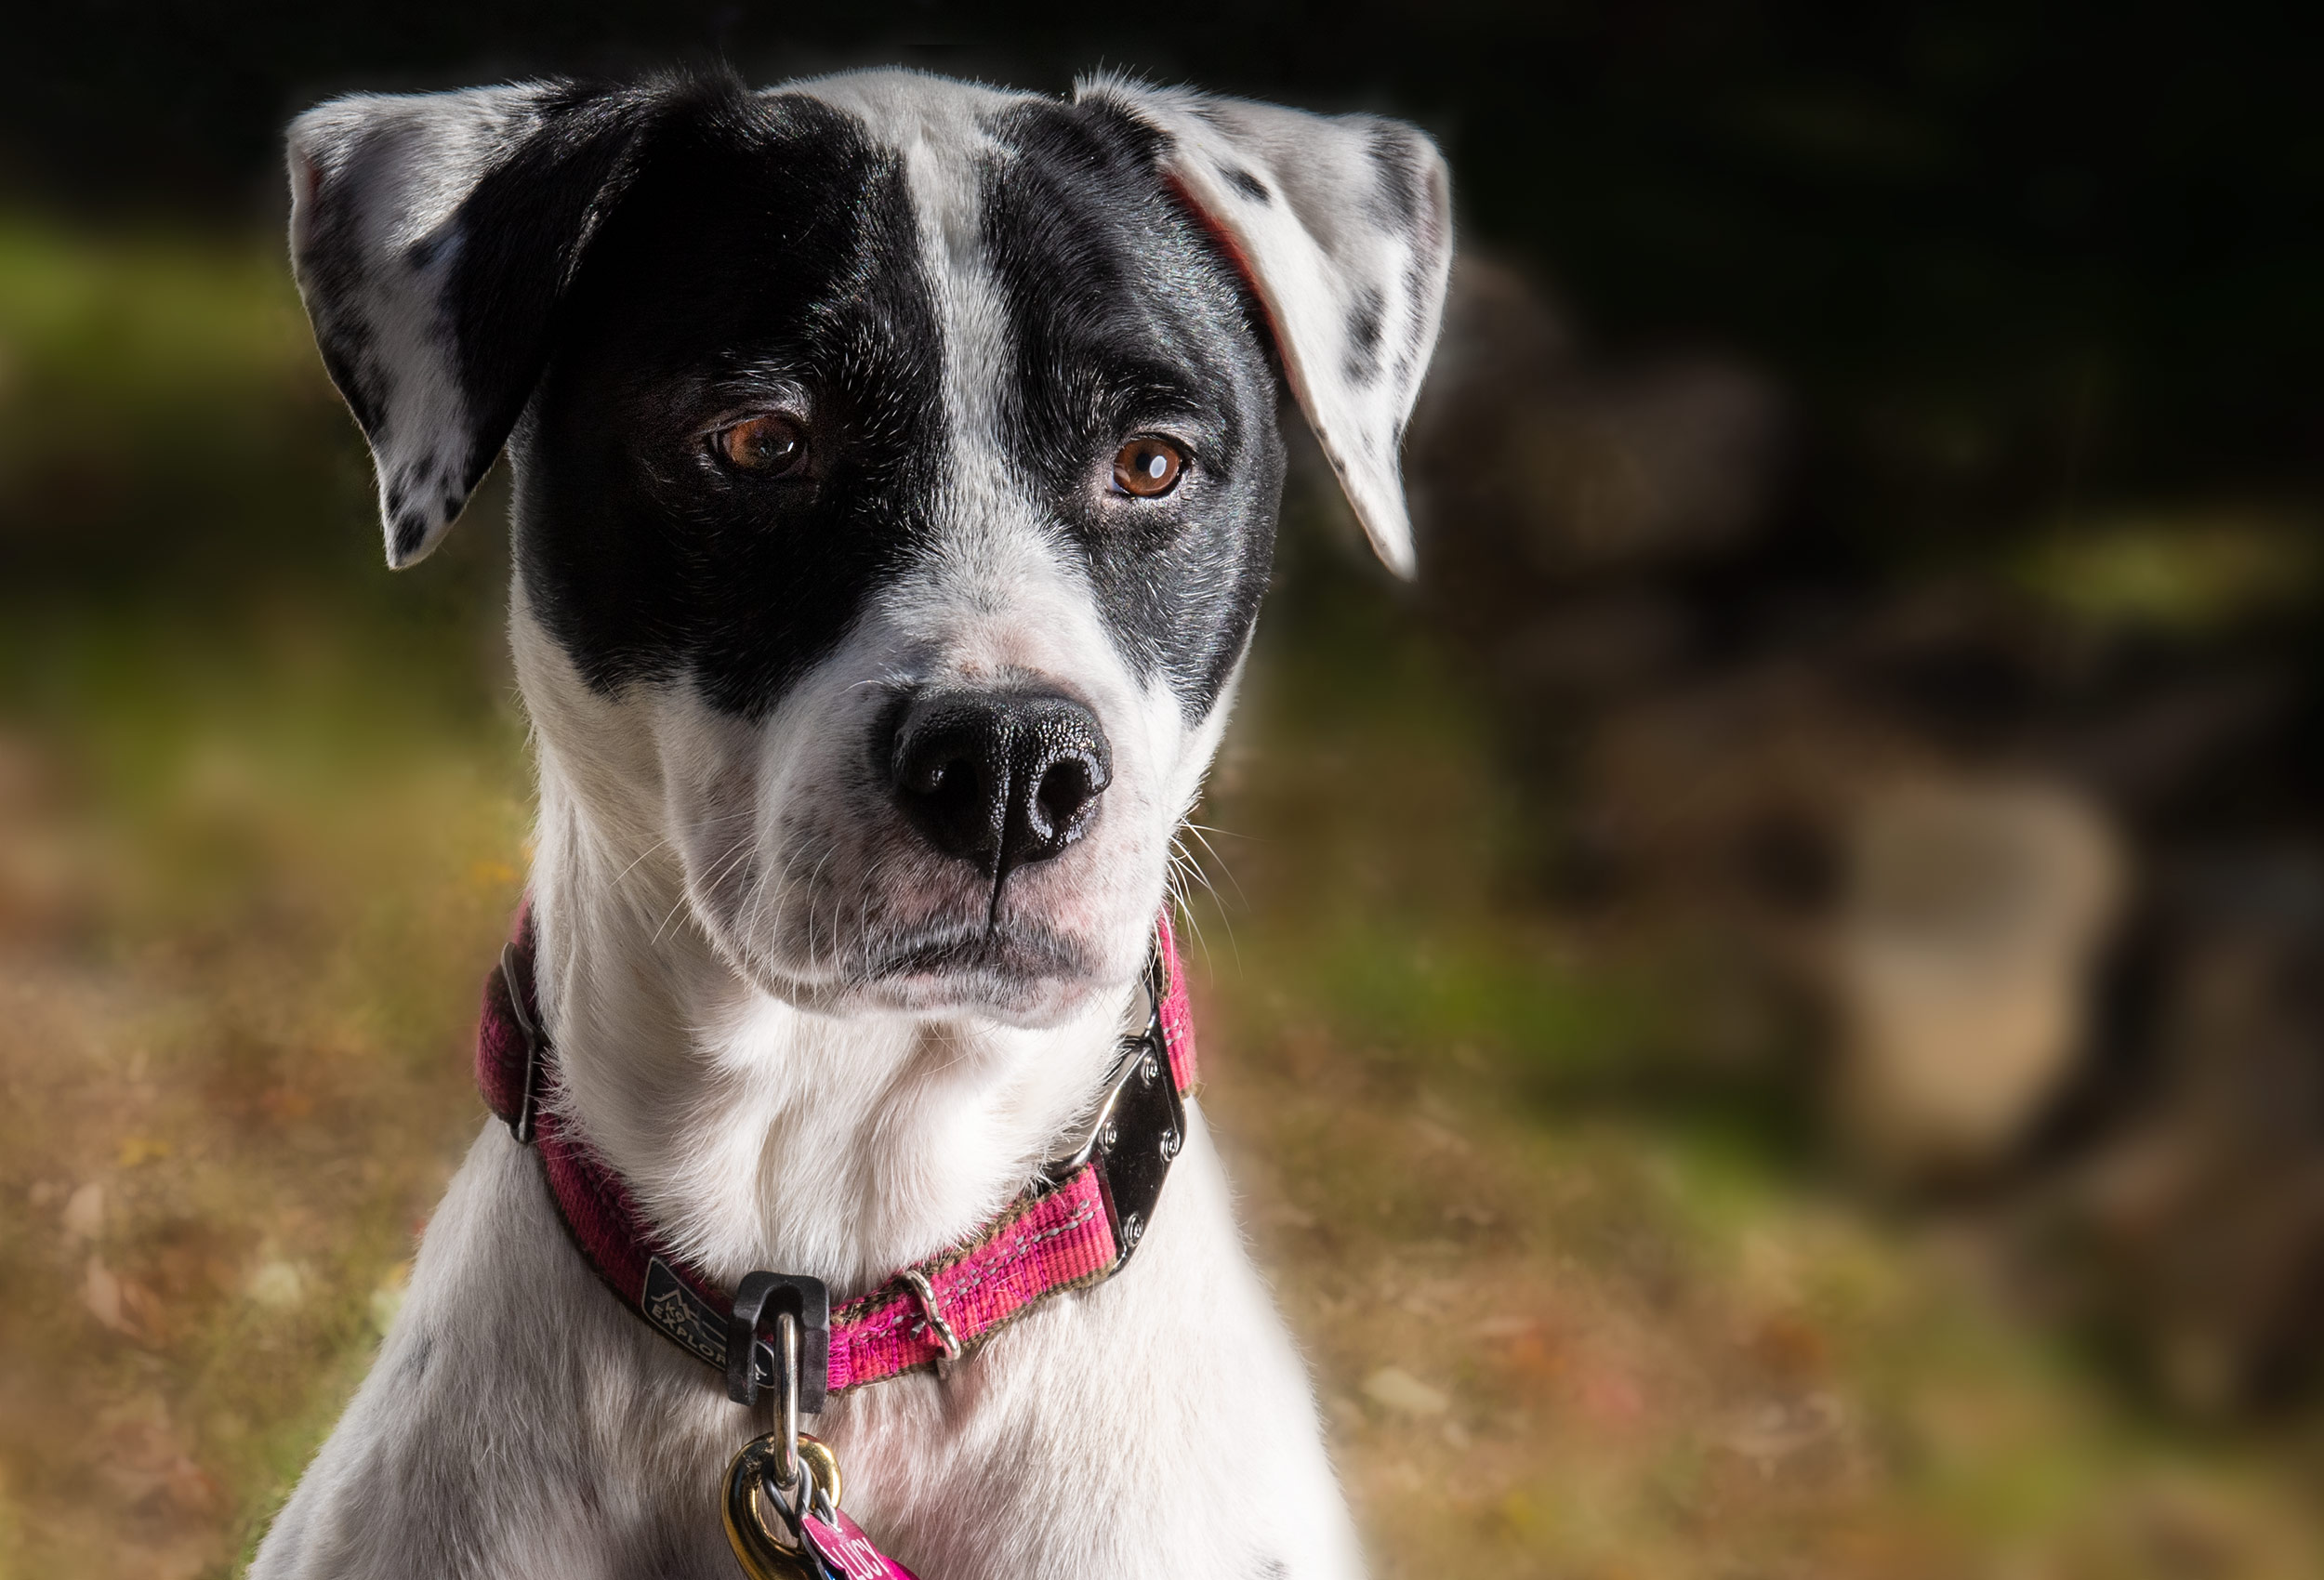 Black and white hound dog with red collar portrait